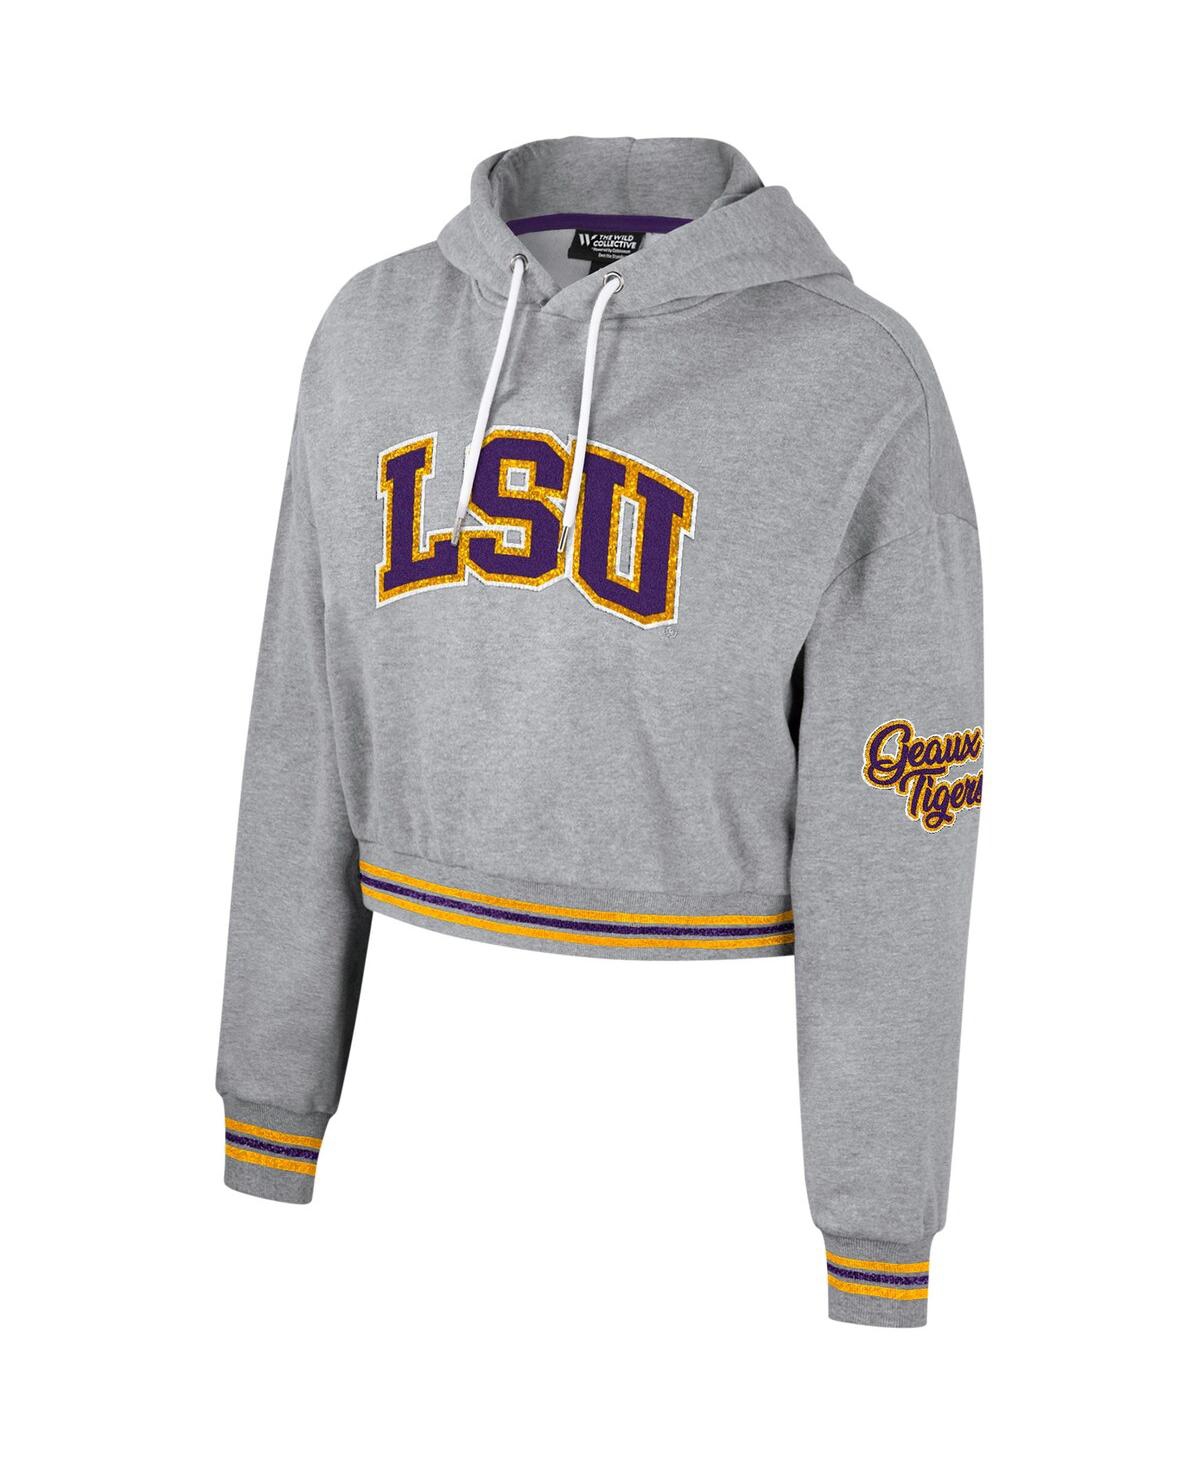 Shop The Wild Collective Women's  Heather Gray Distressed Lsu Tigers Cropped Shimmer Pullover Hoodie